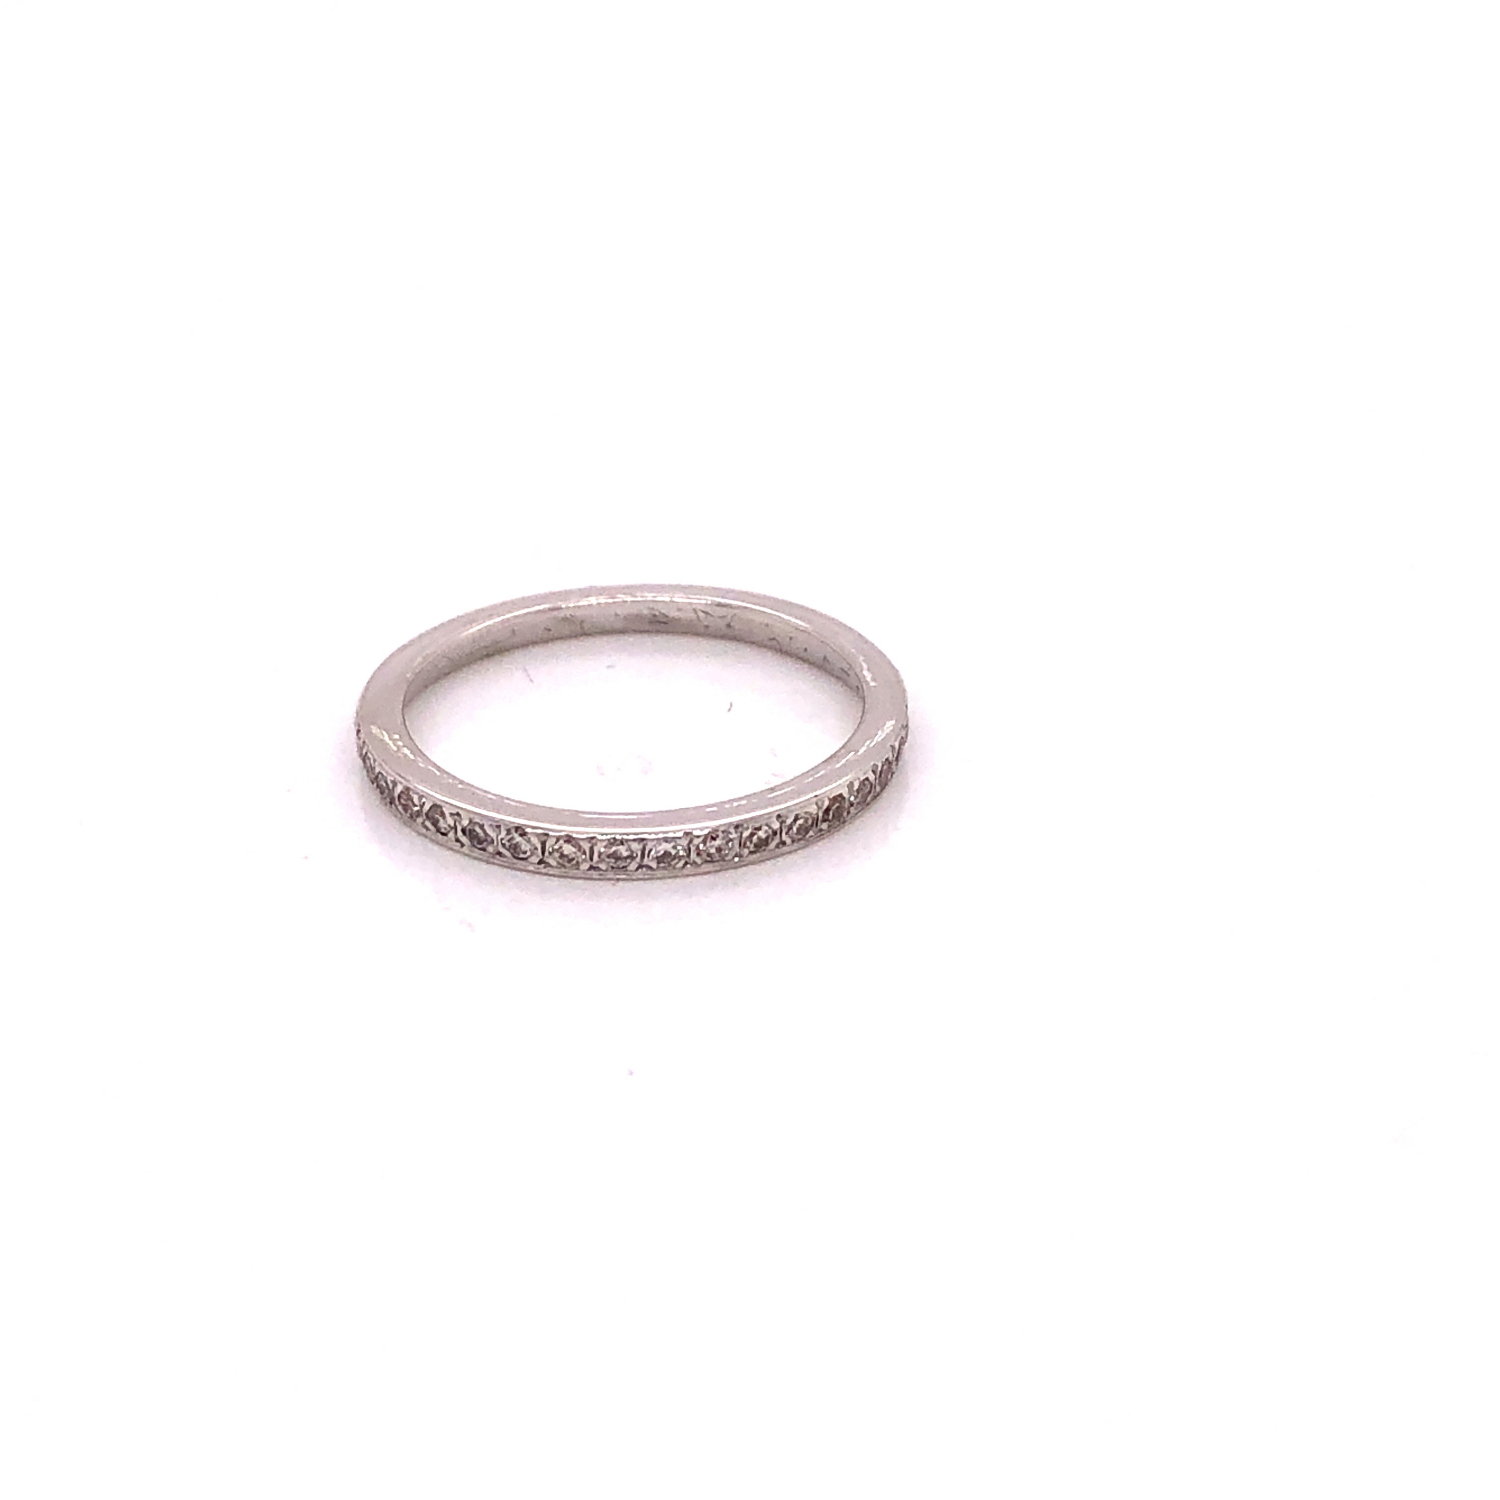 A 14ct WHITE GOLD TWO ROW DIAMOND SET HALF ETERNITY RING. FINGER SIZE M 1/2, GROSS WEIGHT 2.2grms. - Image 2 of 5